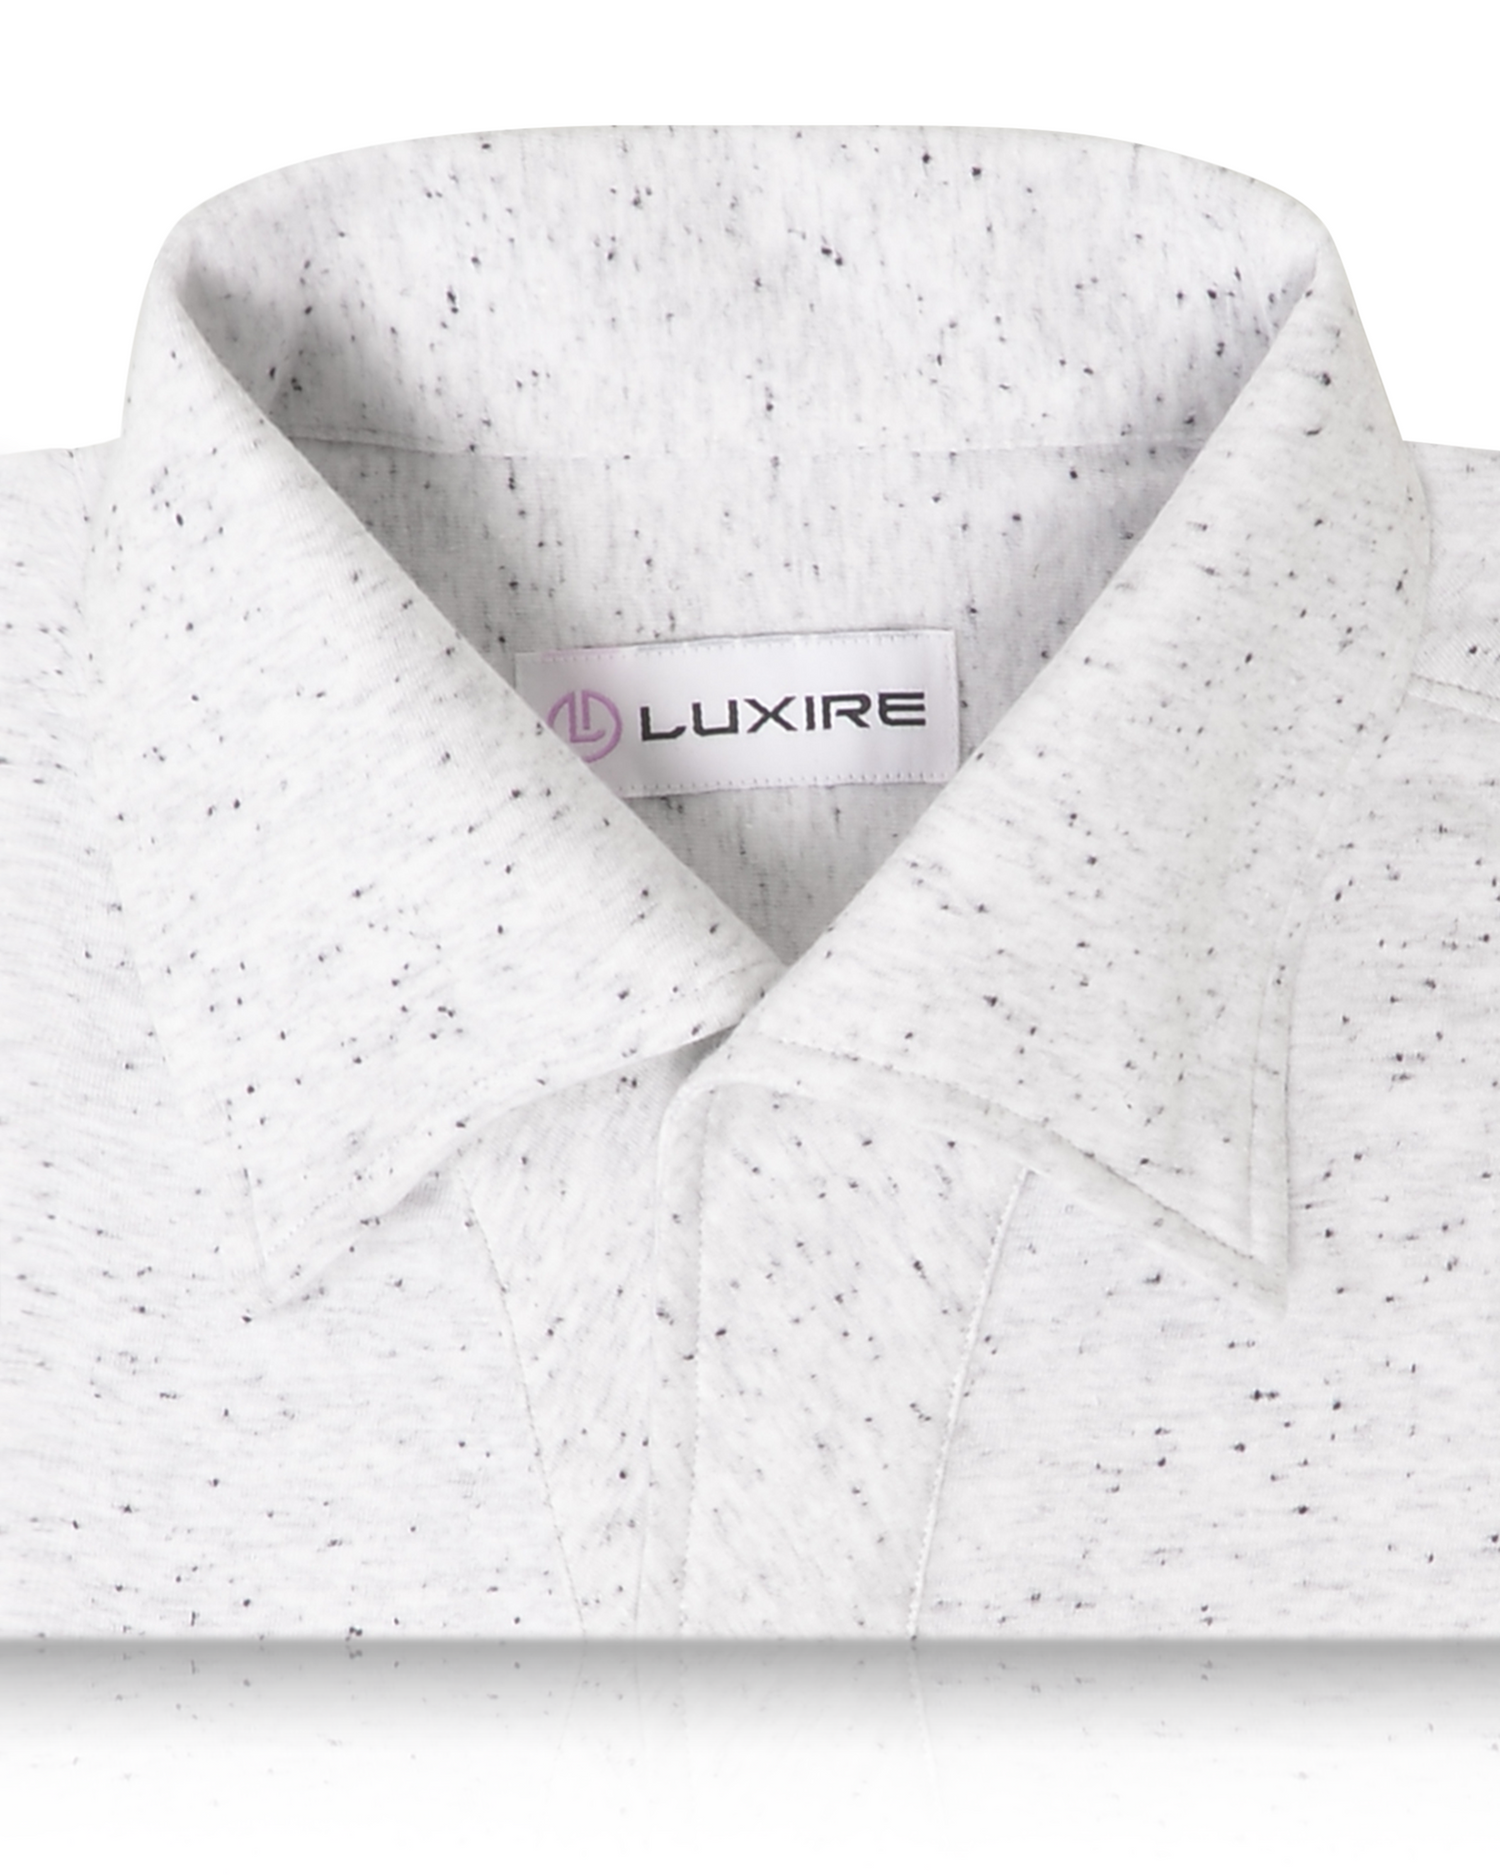 Collar of the custom oxford polo shirt for men by Luxire in speckled white